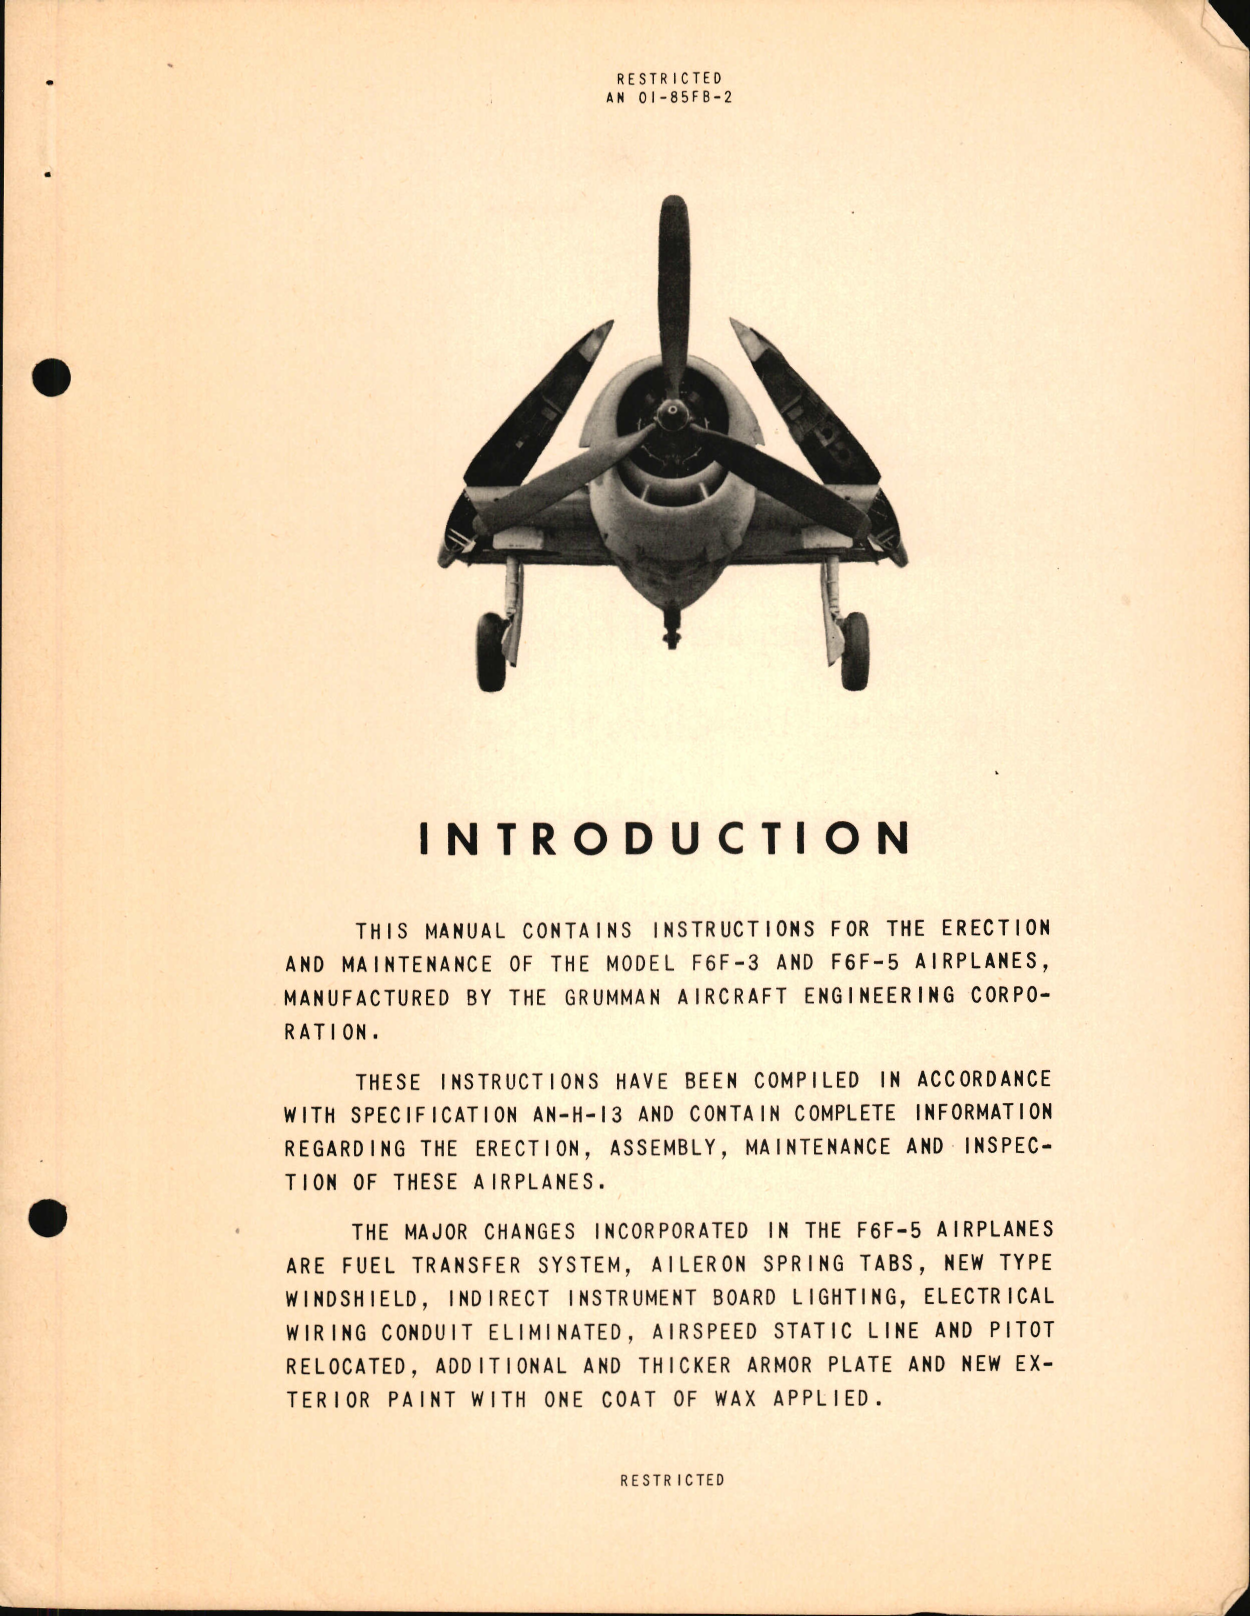 Sample page 7 from AirCorps Library document: Erection and Maintenance Instructions for F6F-3, F6F-3N, F6F-5, and F6F-5N